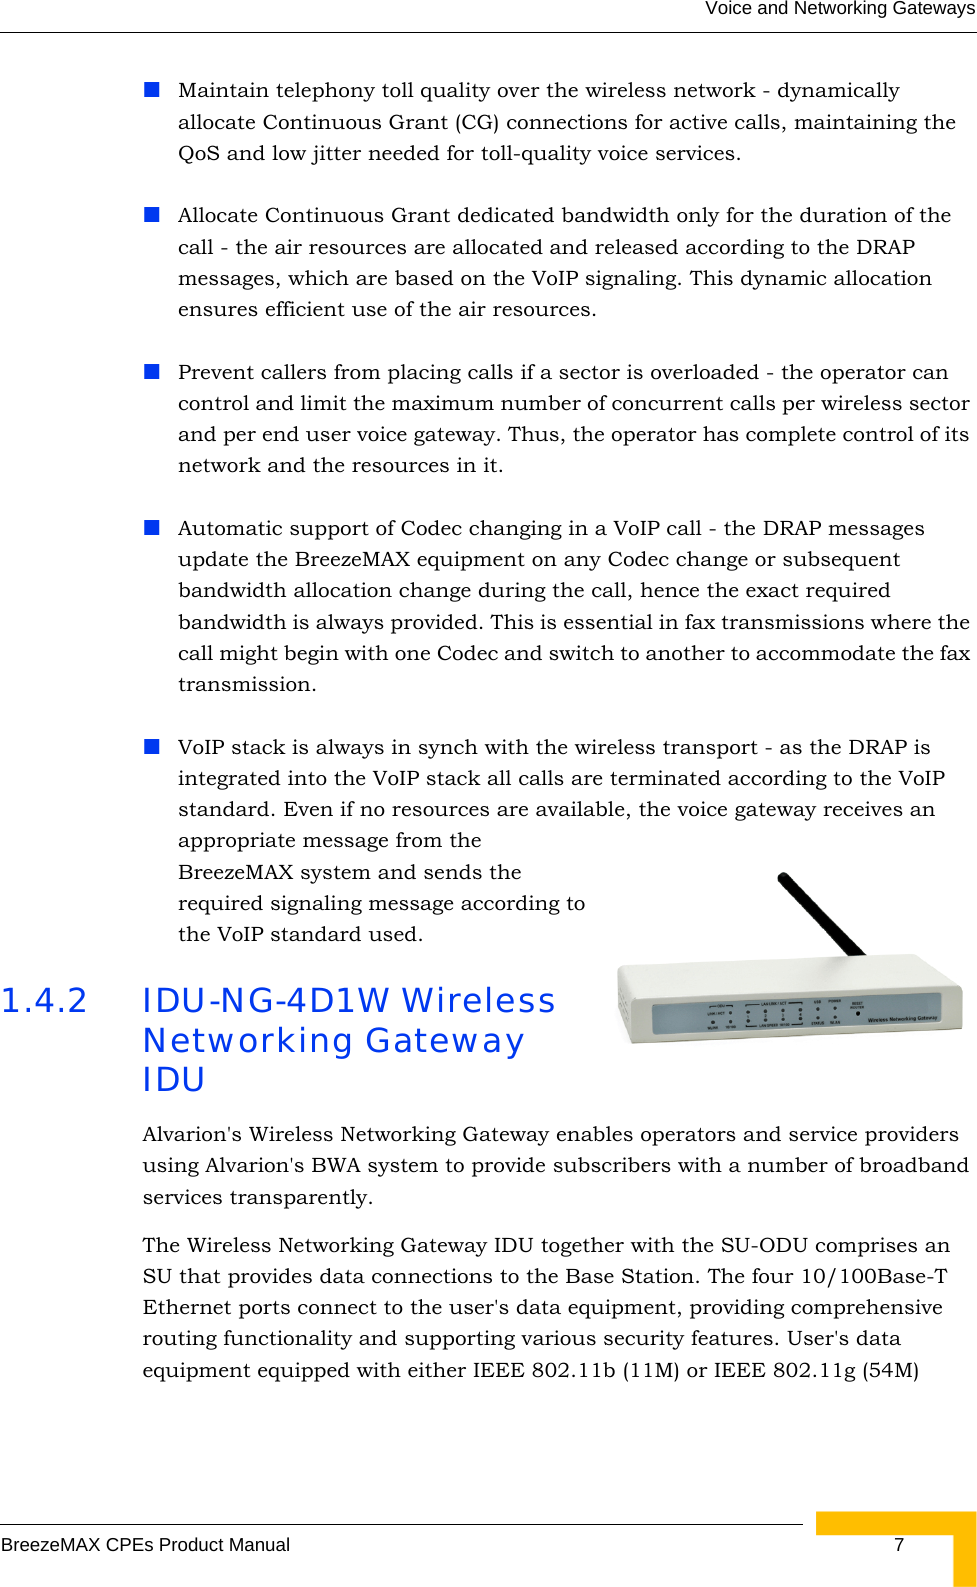 Voice and Networking GatewaysBreezeMAX CPEs Product Manual 7Maintain telephony toll quality over the wireless network - dynamically allocate Continuous Grant (CG) connections for active calls, maintaining the QoS and low jitter needed for toll-quality voice services.Allocate Continuous Grant dedicated bandwidth only for the duration of the call - the air resources are allocated and released according to the DRAP messages, which are based on the VoIP signaling. This dynamic allocation ensures efficient use of the air resources.Prevent callers from placing calls if a sector is overloaded - the operator can control and limit the maximum number of concurrent calls per wireless sector and per end user voice gateway. Thus, the operator has complete control of its network and the resources in it.Automatic support of Codec changing in a VoIP call - the DRAP messages update the BreezeMAX equipment on any Codec change or subsequent bandwidth allocation change during the call, hence the exact required bandwidth is always provided. This is essential in fax transmissions where the call might begin with one Codec and switch to another to accommodate the fax transmission.VoIP stack is always in synch with the wireless transport - as the DRAP is integrated into the VoIP stack all calls are terminated according to the VoIP standard. Even if no resources are available, the voice gateway receives an appropriate message from the BreezeMAX system and sends the required signaling message according to the VoIP standard used.1.4.2 IDU-NG-4D1W Wireless Networking Gateway IDUAlvarion&apos;s Wireless Networking Gateway enables operators and service providers using Alvarion&apos;s BWA system to provide subscribers with a number of broadband services transparently. The Wireless Networking Gateway IDU together with the SU-ODU comprises an SU that provides data connections to the Base Station. The four 10/100Base-T Ethernet ports connect to the user&apos;s data equipment, providing comprehensive routing functionality and supporting various security features. User&apos;s data equipment equipped with either IEEE 802.11b (11M) or IEEE 802.11g (54M) 